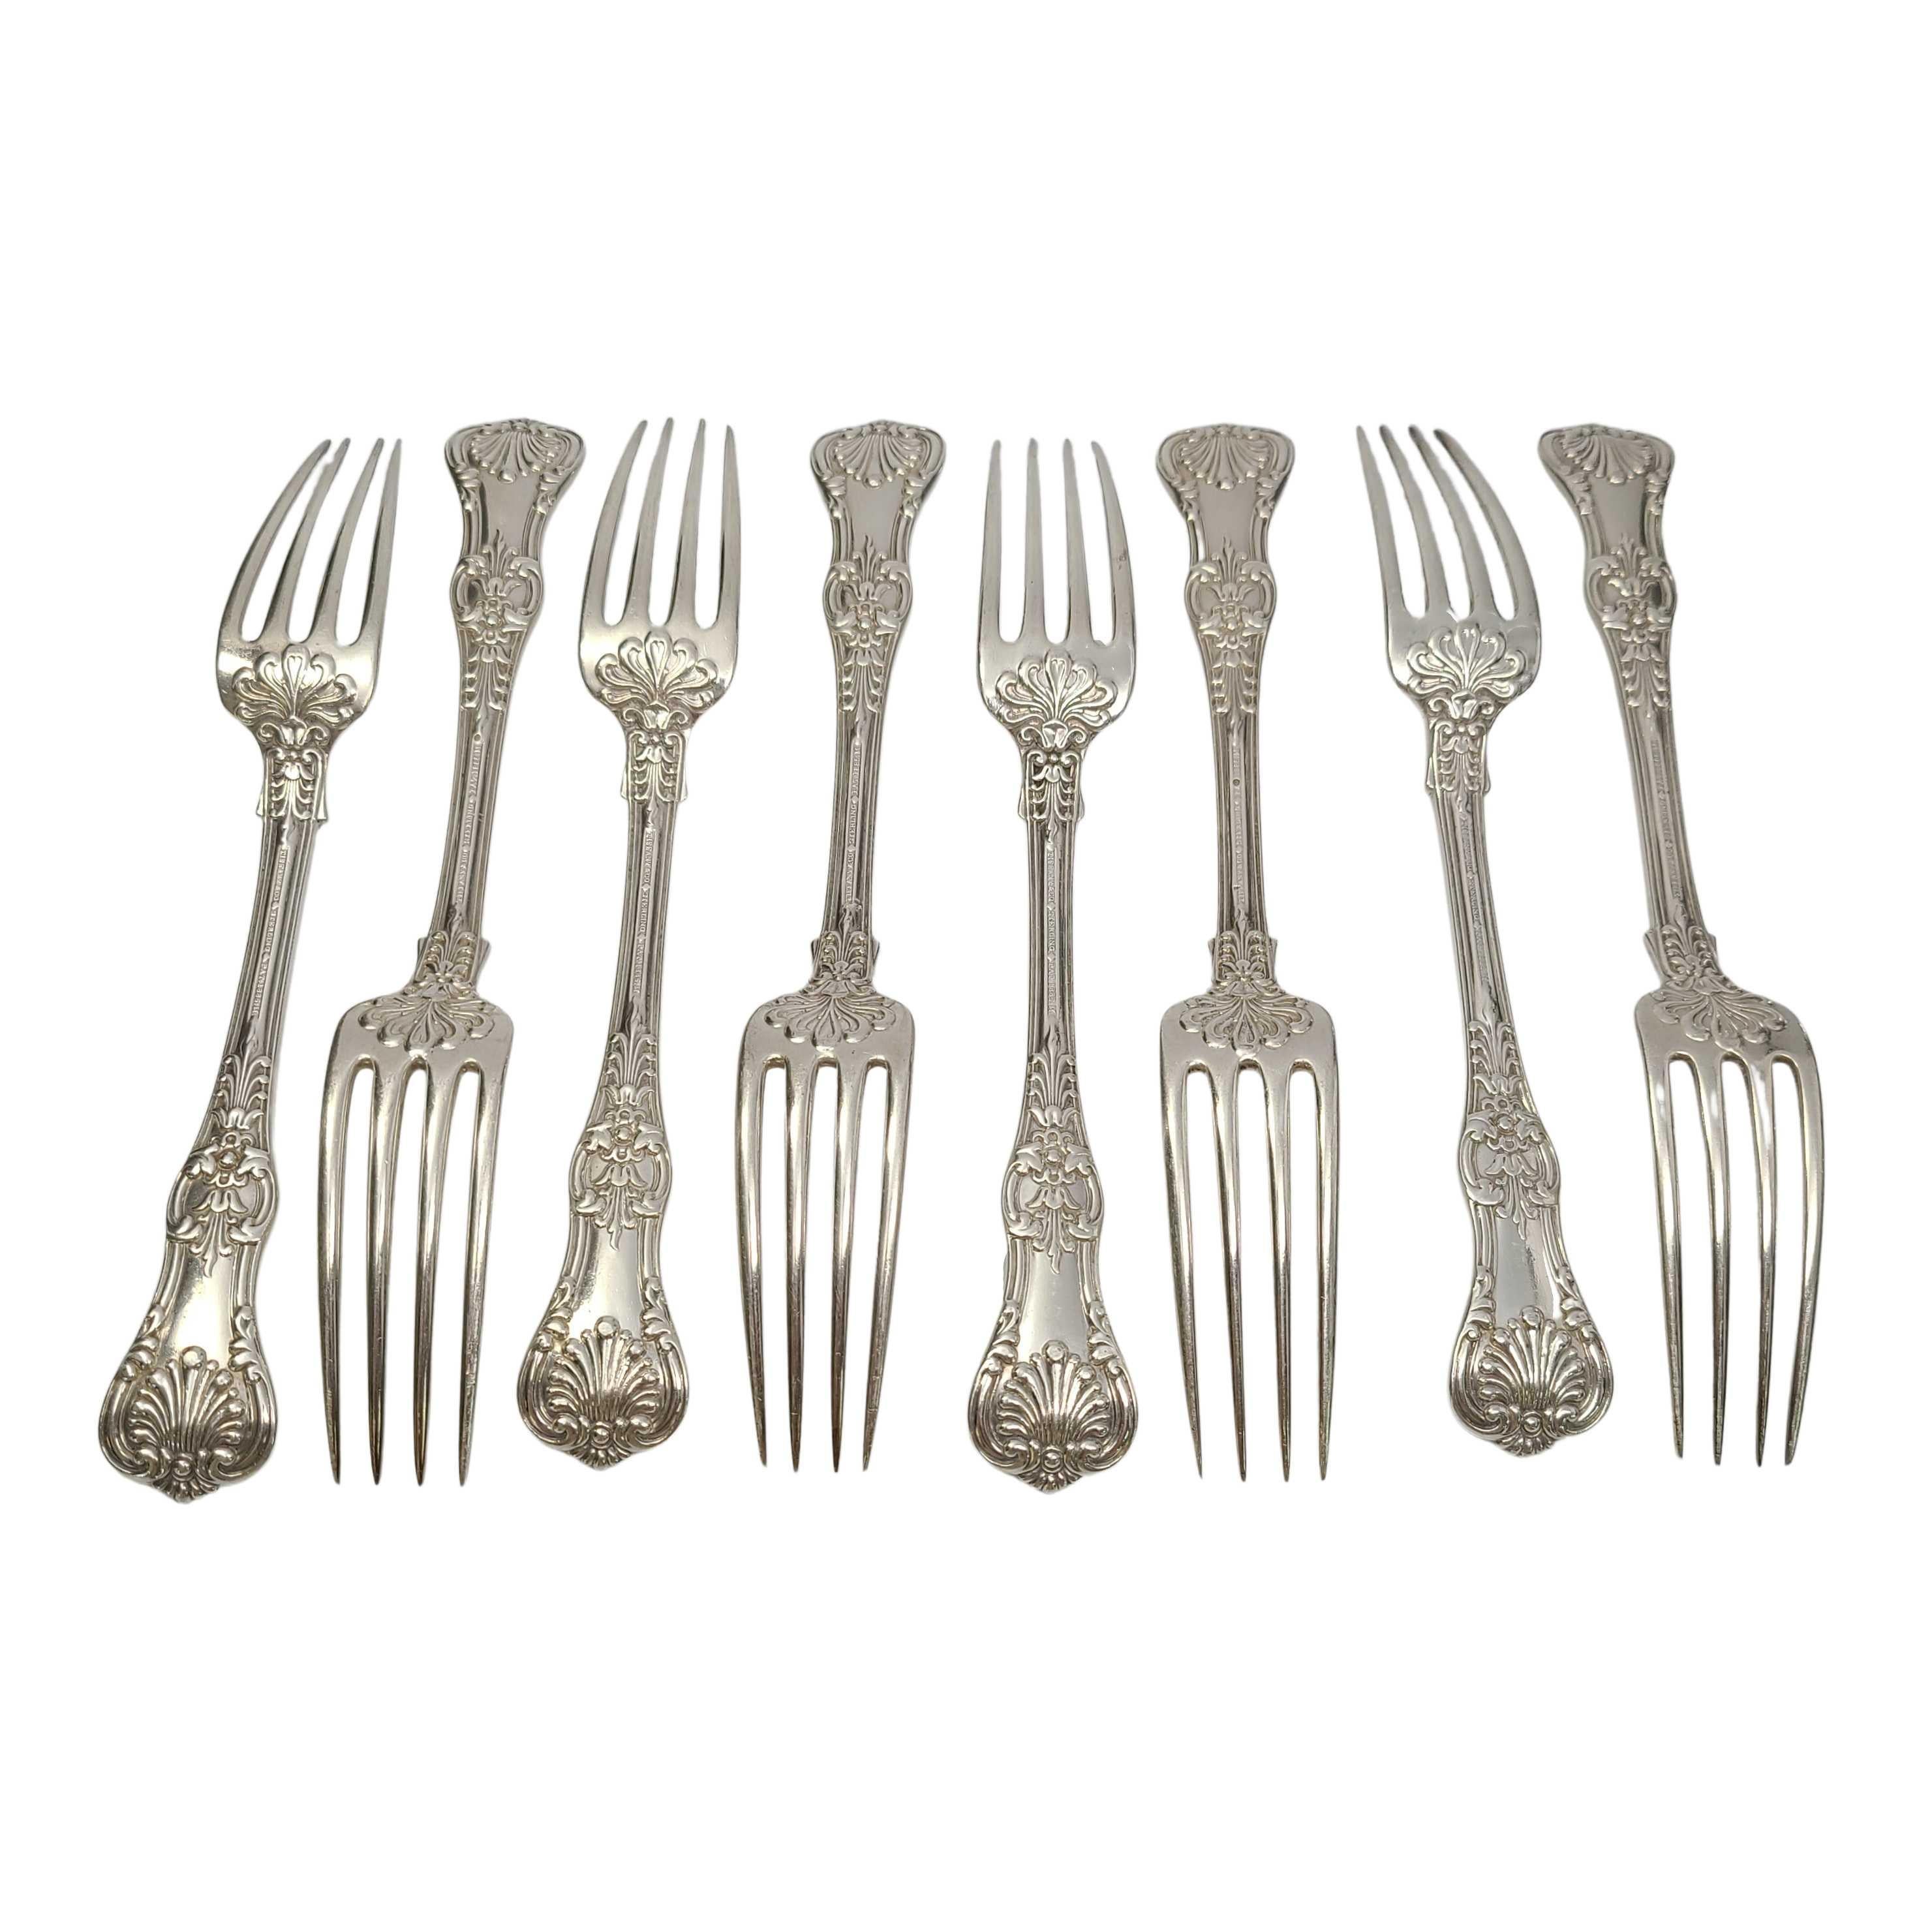 Set of 8 antique sterling silver forks by Tiffany & Co in the English King pattern.

Monogram appears to be DH (see photos).

Beautiful dinner forks in Tiffany's intricate and decorative version of a King pattern which were very popular in the